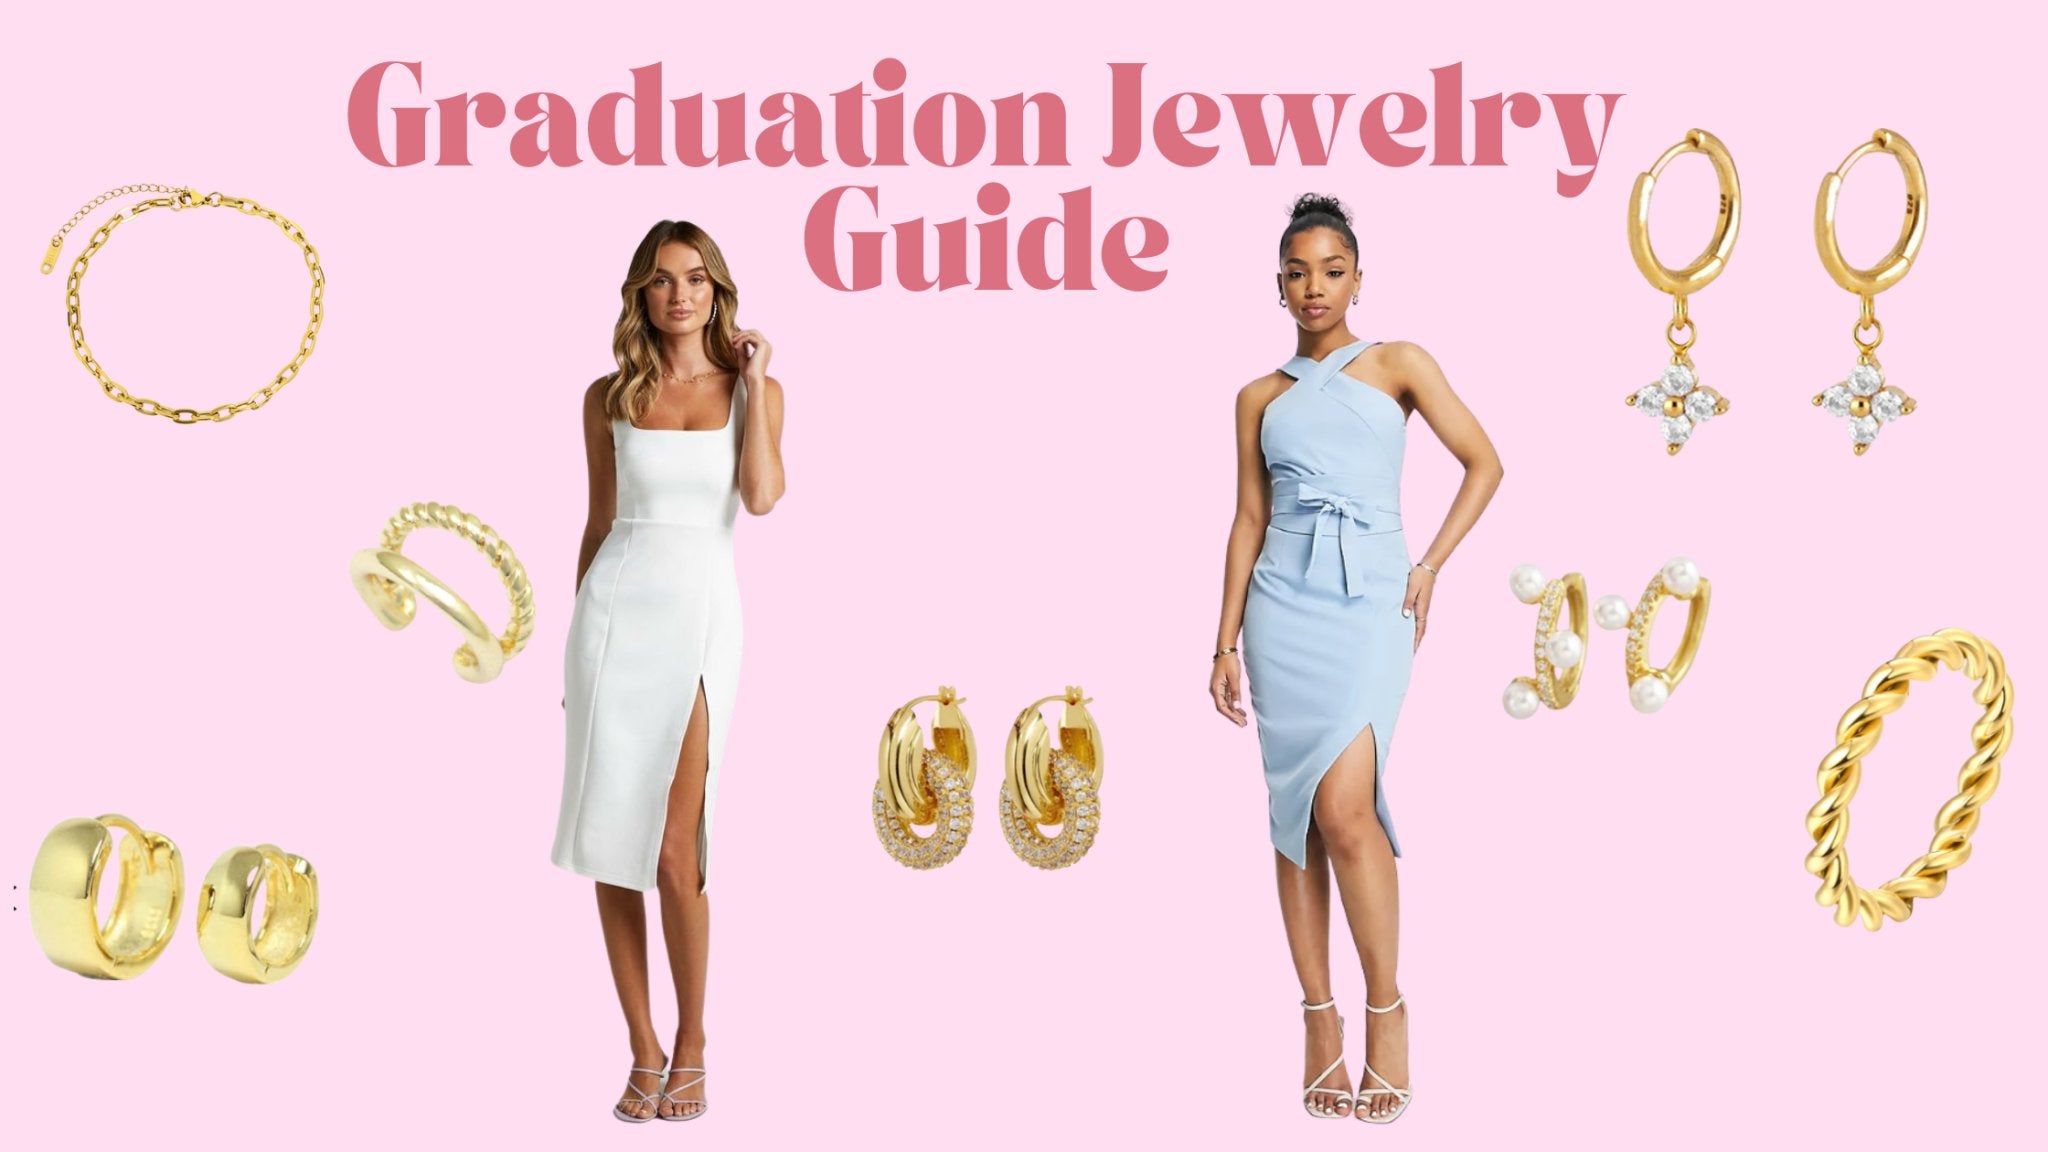 The Graduation Jewelry Guide and Gift Ideas - Smoothie London